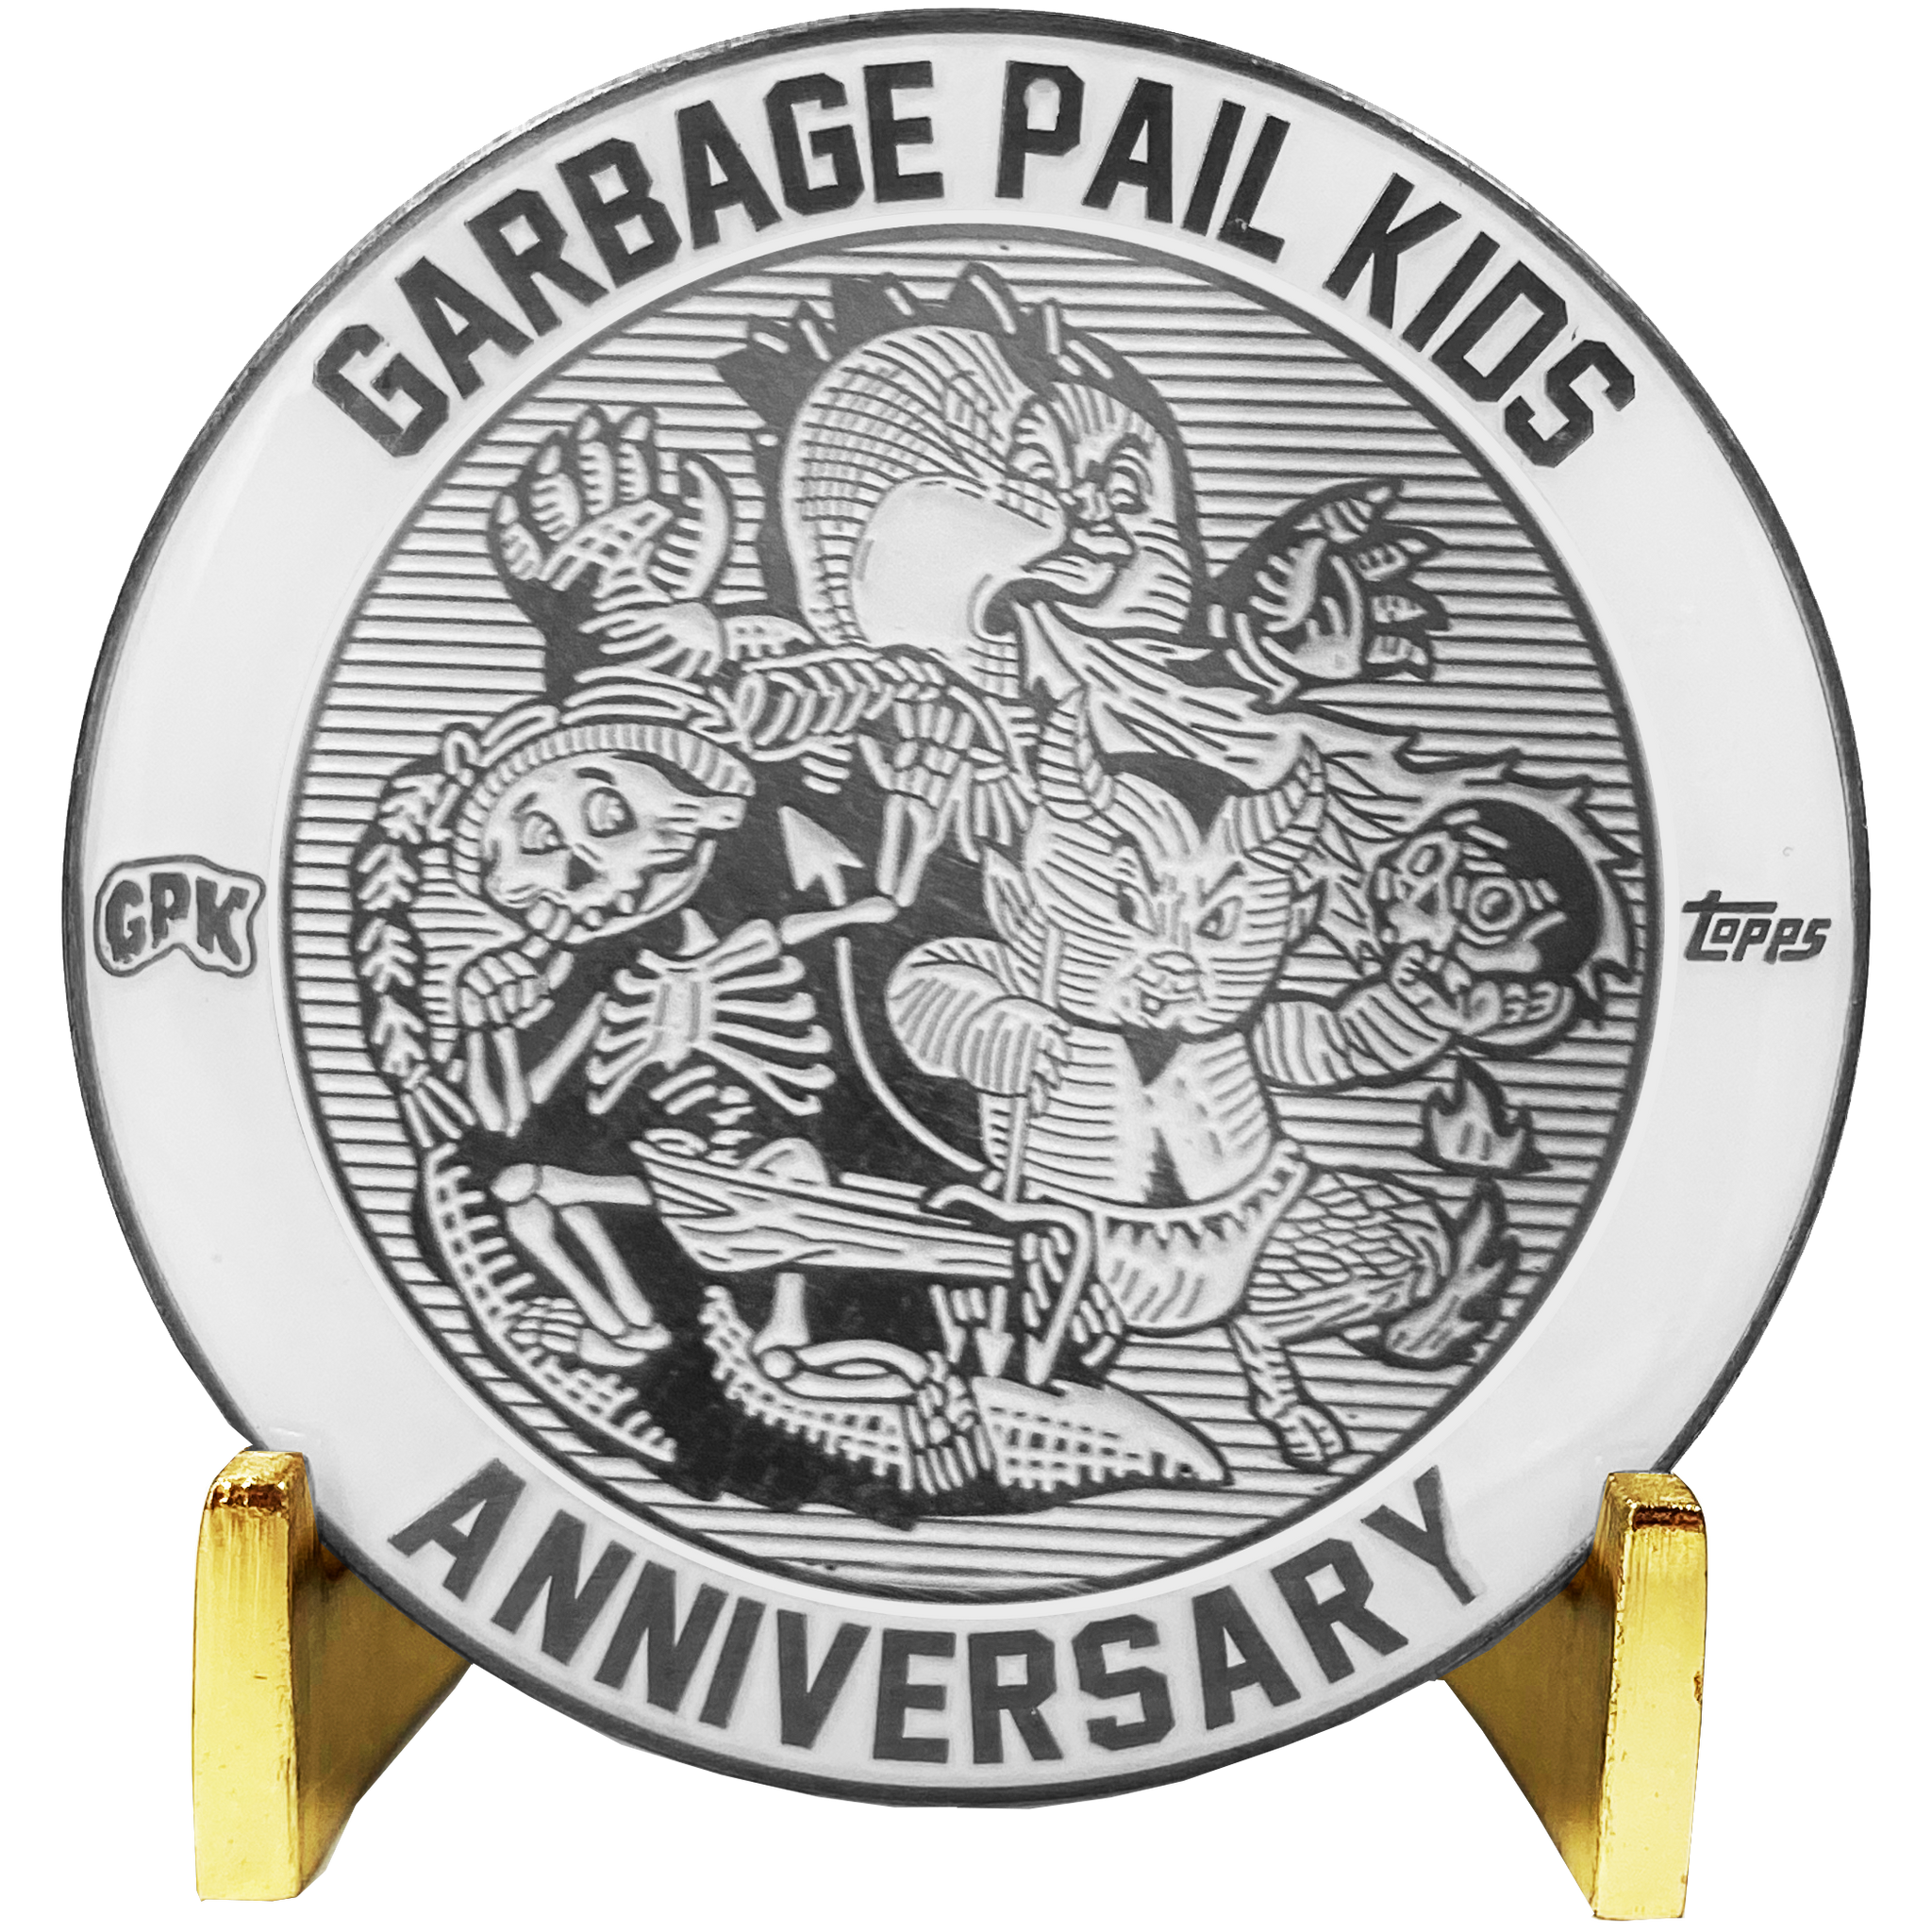 Coin 003 Nickel plated white cloisonné Topps Officially Licensed challenge coin Garbage Pail Kids GPK Nation